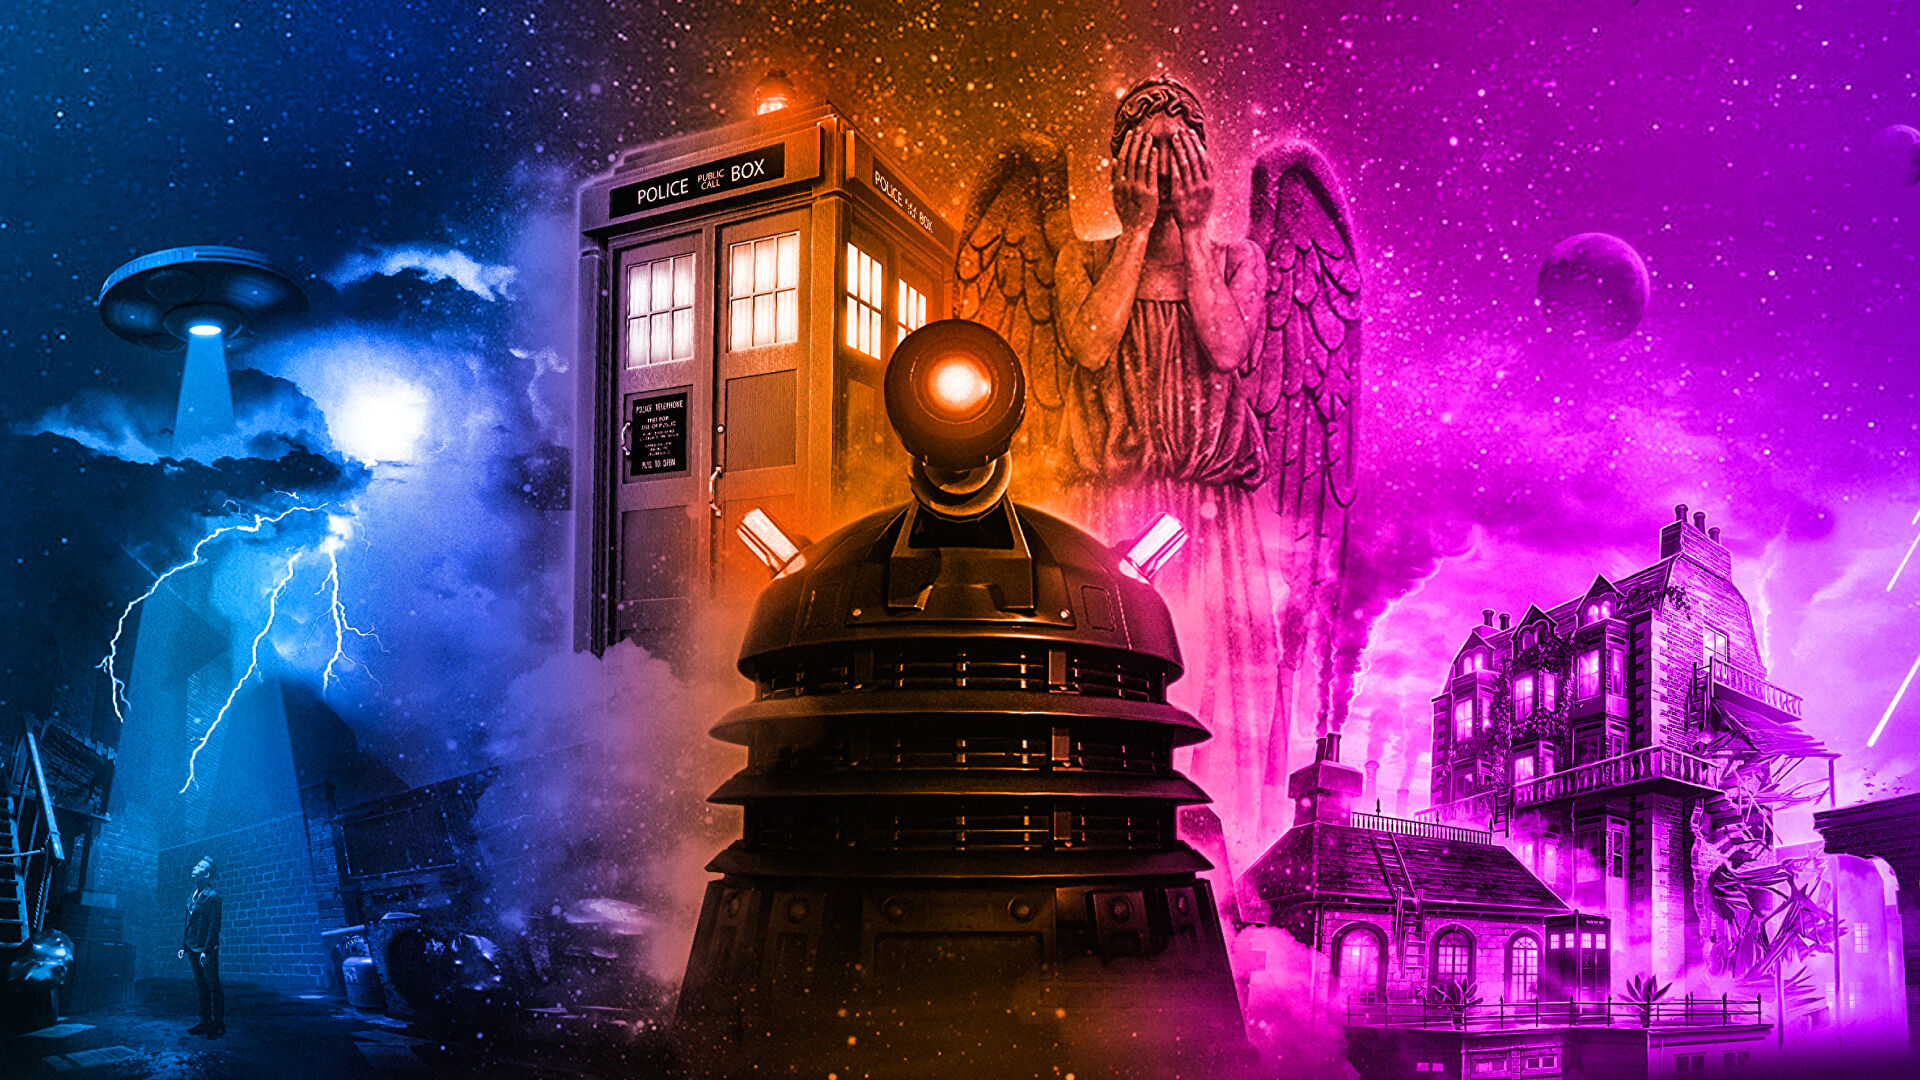 As the rebooted show shoots for international success, now is the time for a big-budget Doctor Who game